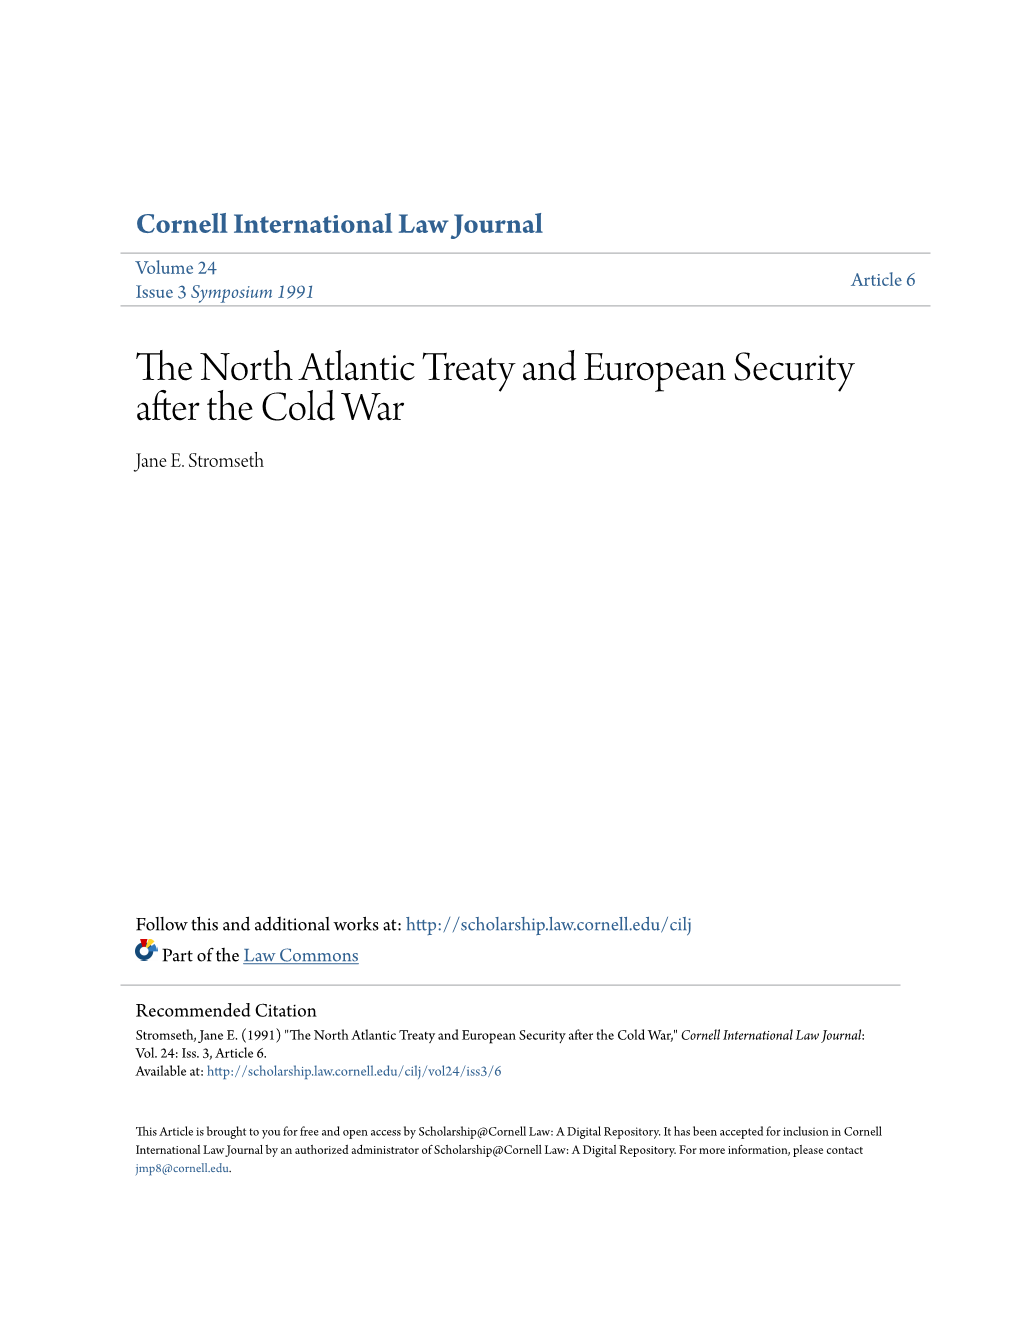 The North Atlantic Treaty and European Security After the Cold War